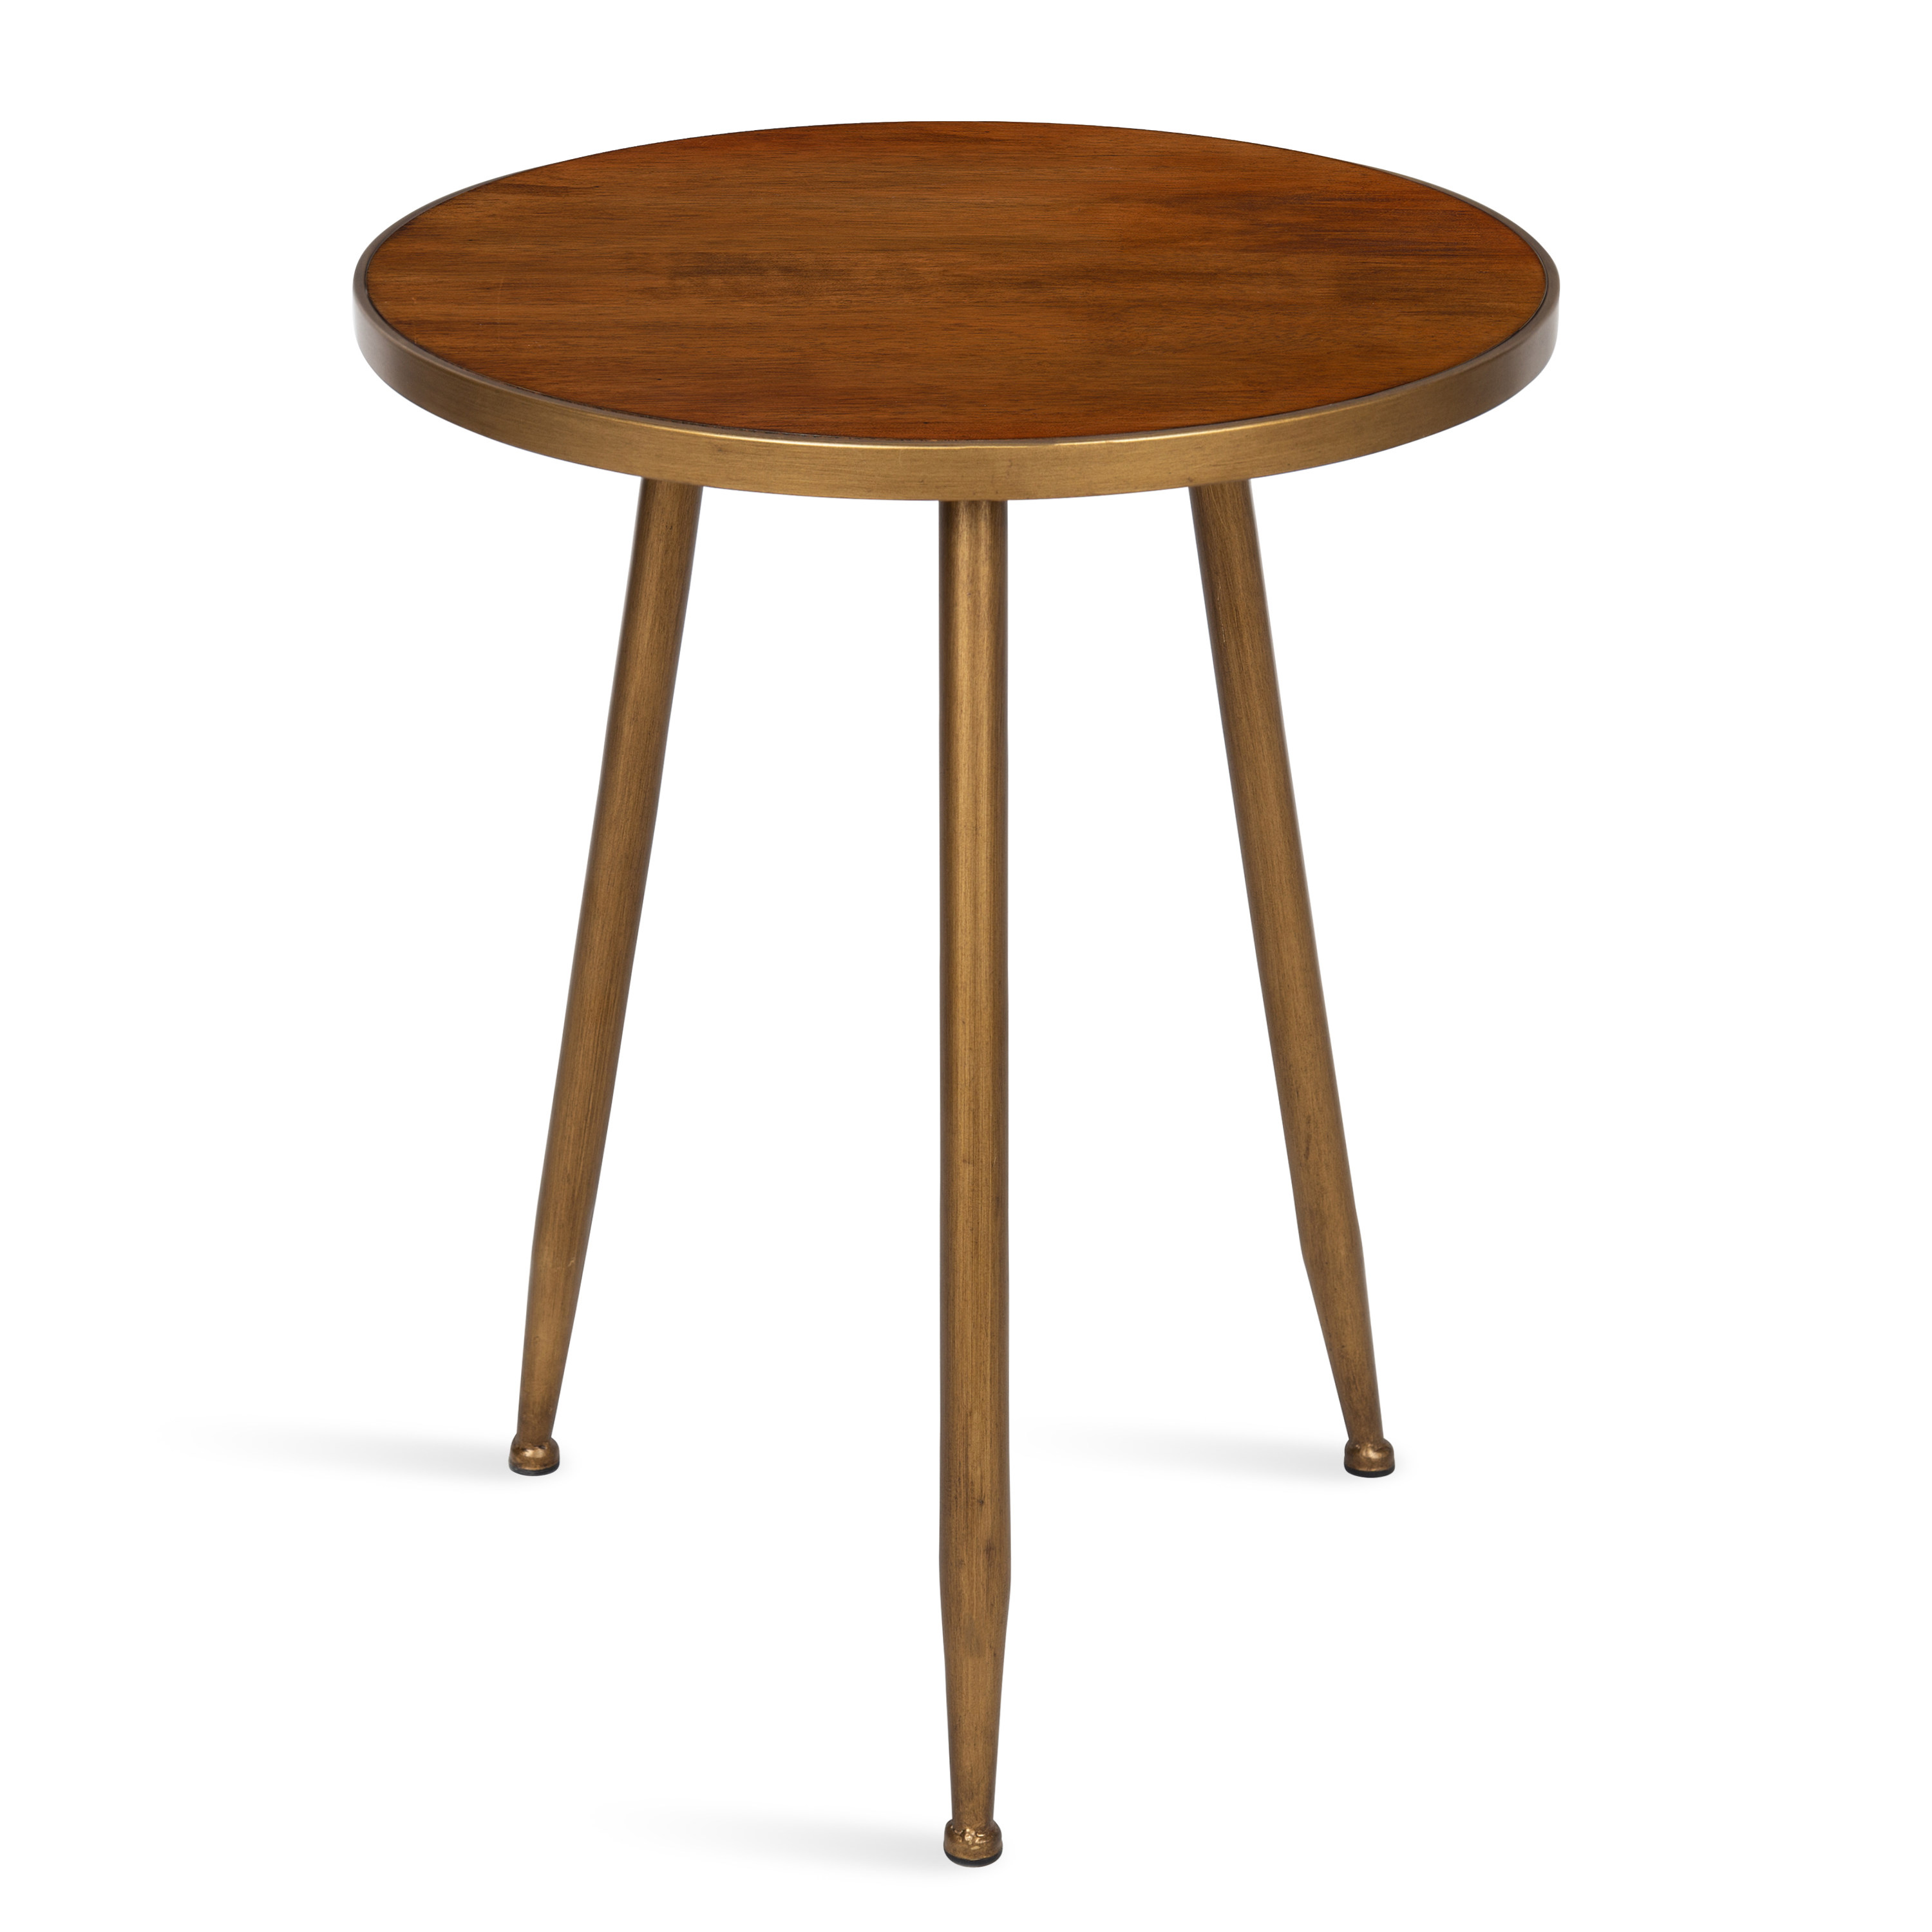 Laurel　Modern　Clegg　Trim　Midcentury　and　3-Legged　Side　Round　Wood　Burnished　Top　and　Metal　Table，　Walnut　Brown　with　Finished　Gold　Legs　並行輸入-　Kate　and